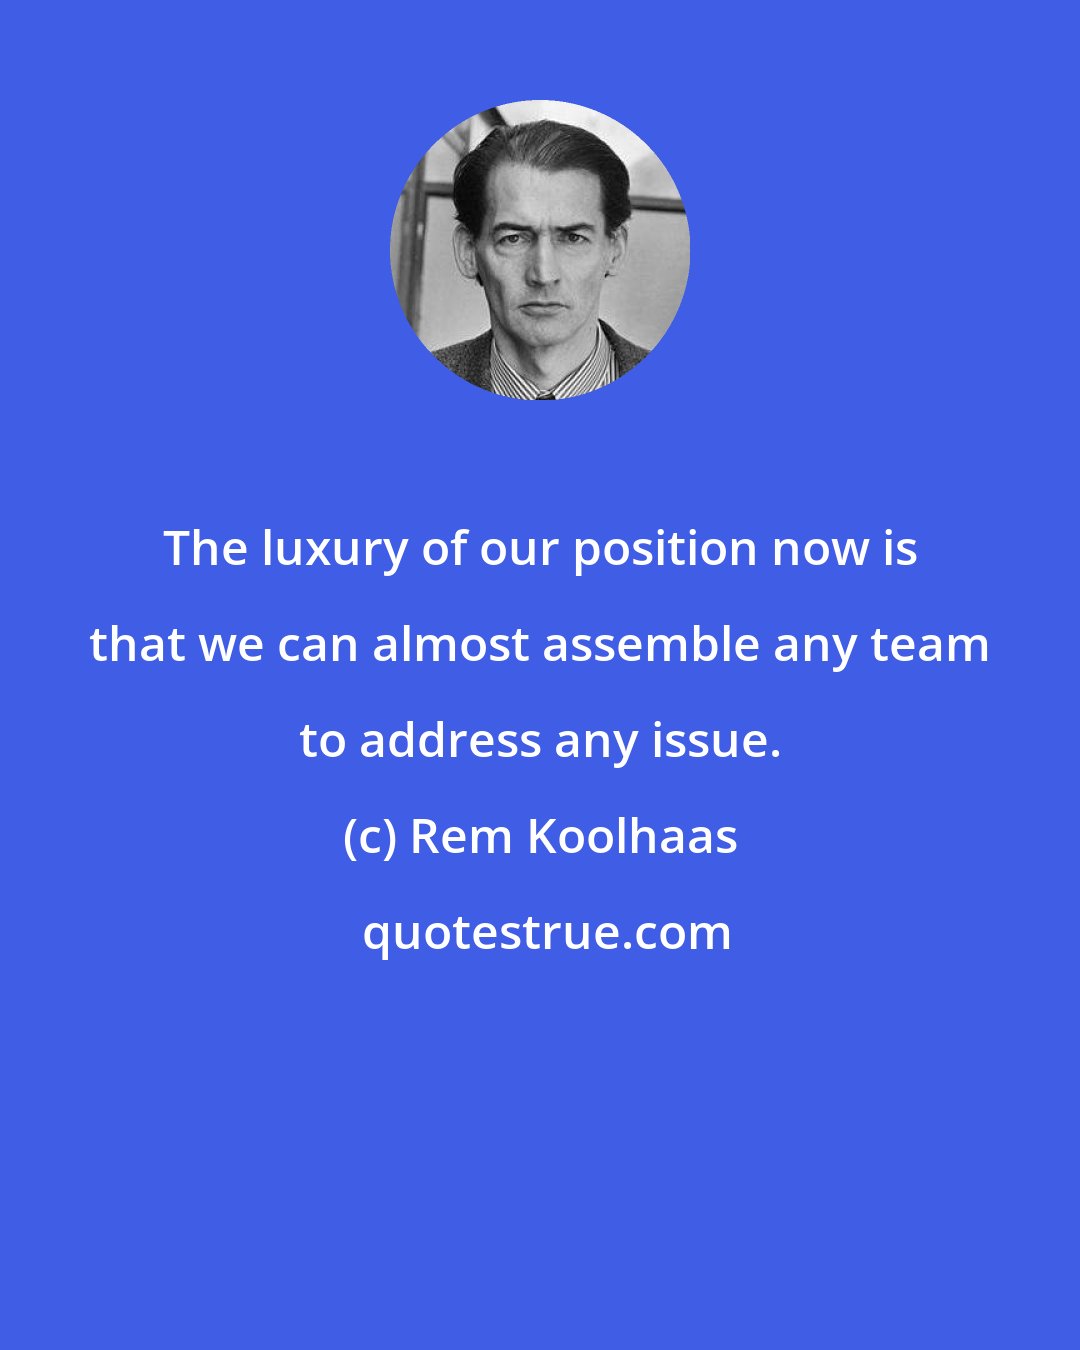 Rem Koolhaas: The luxury of our position now is that we can almost assemble any team to address any issue.